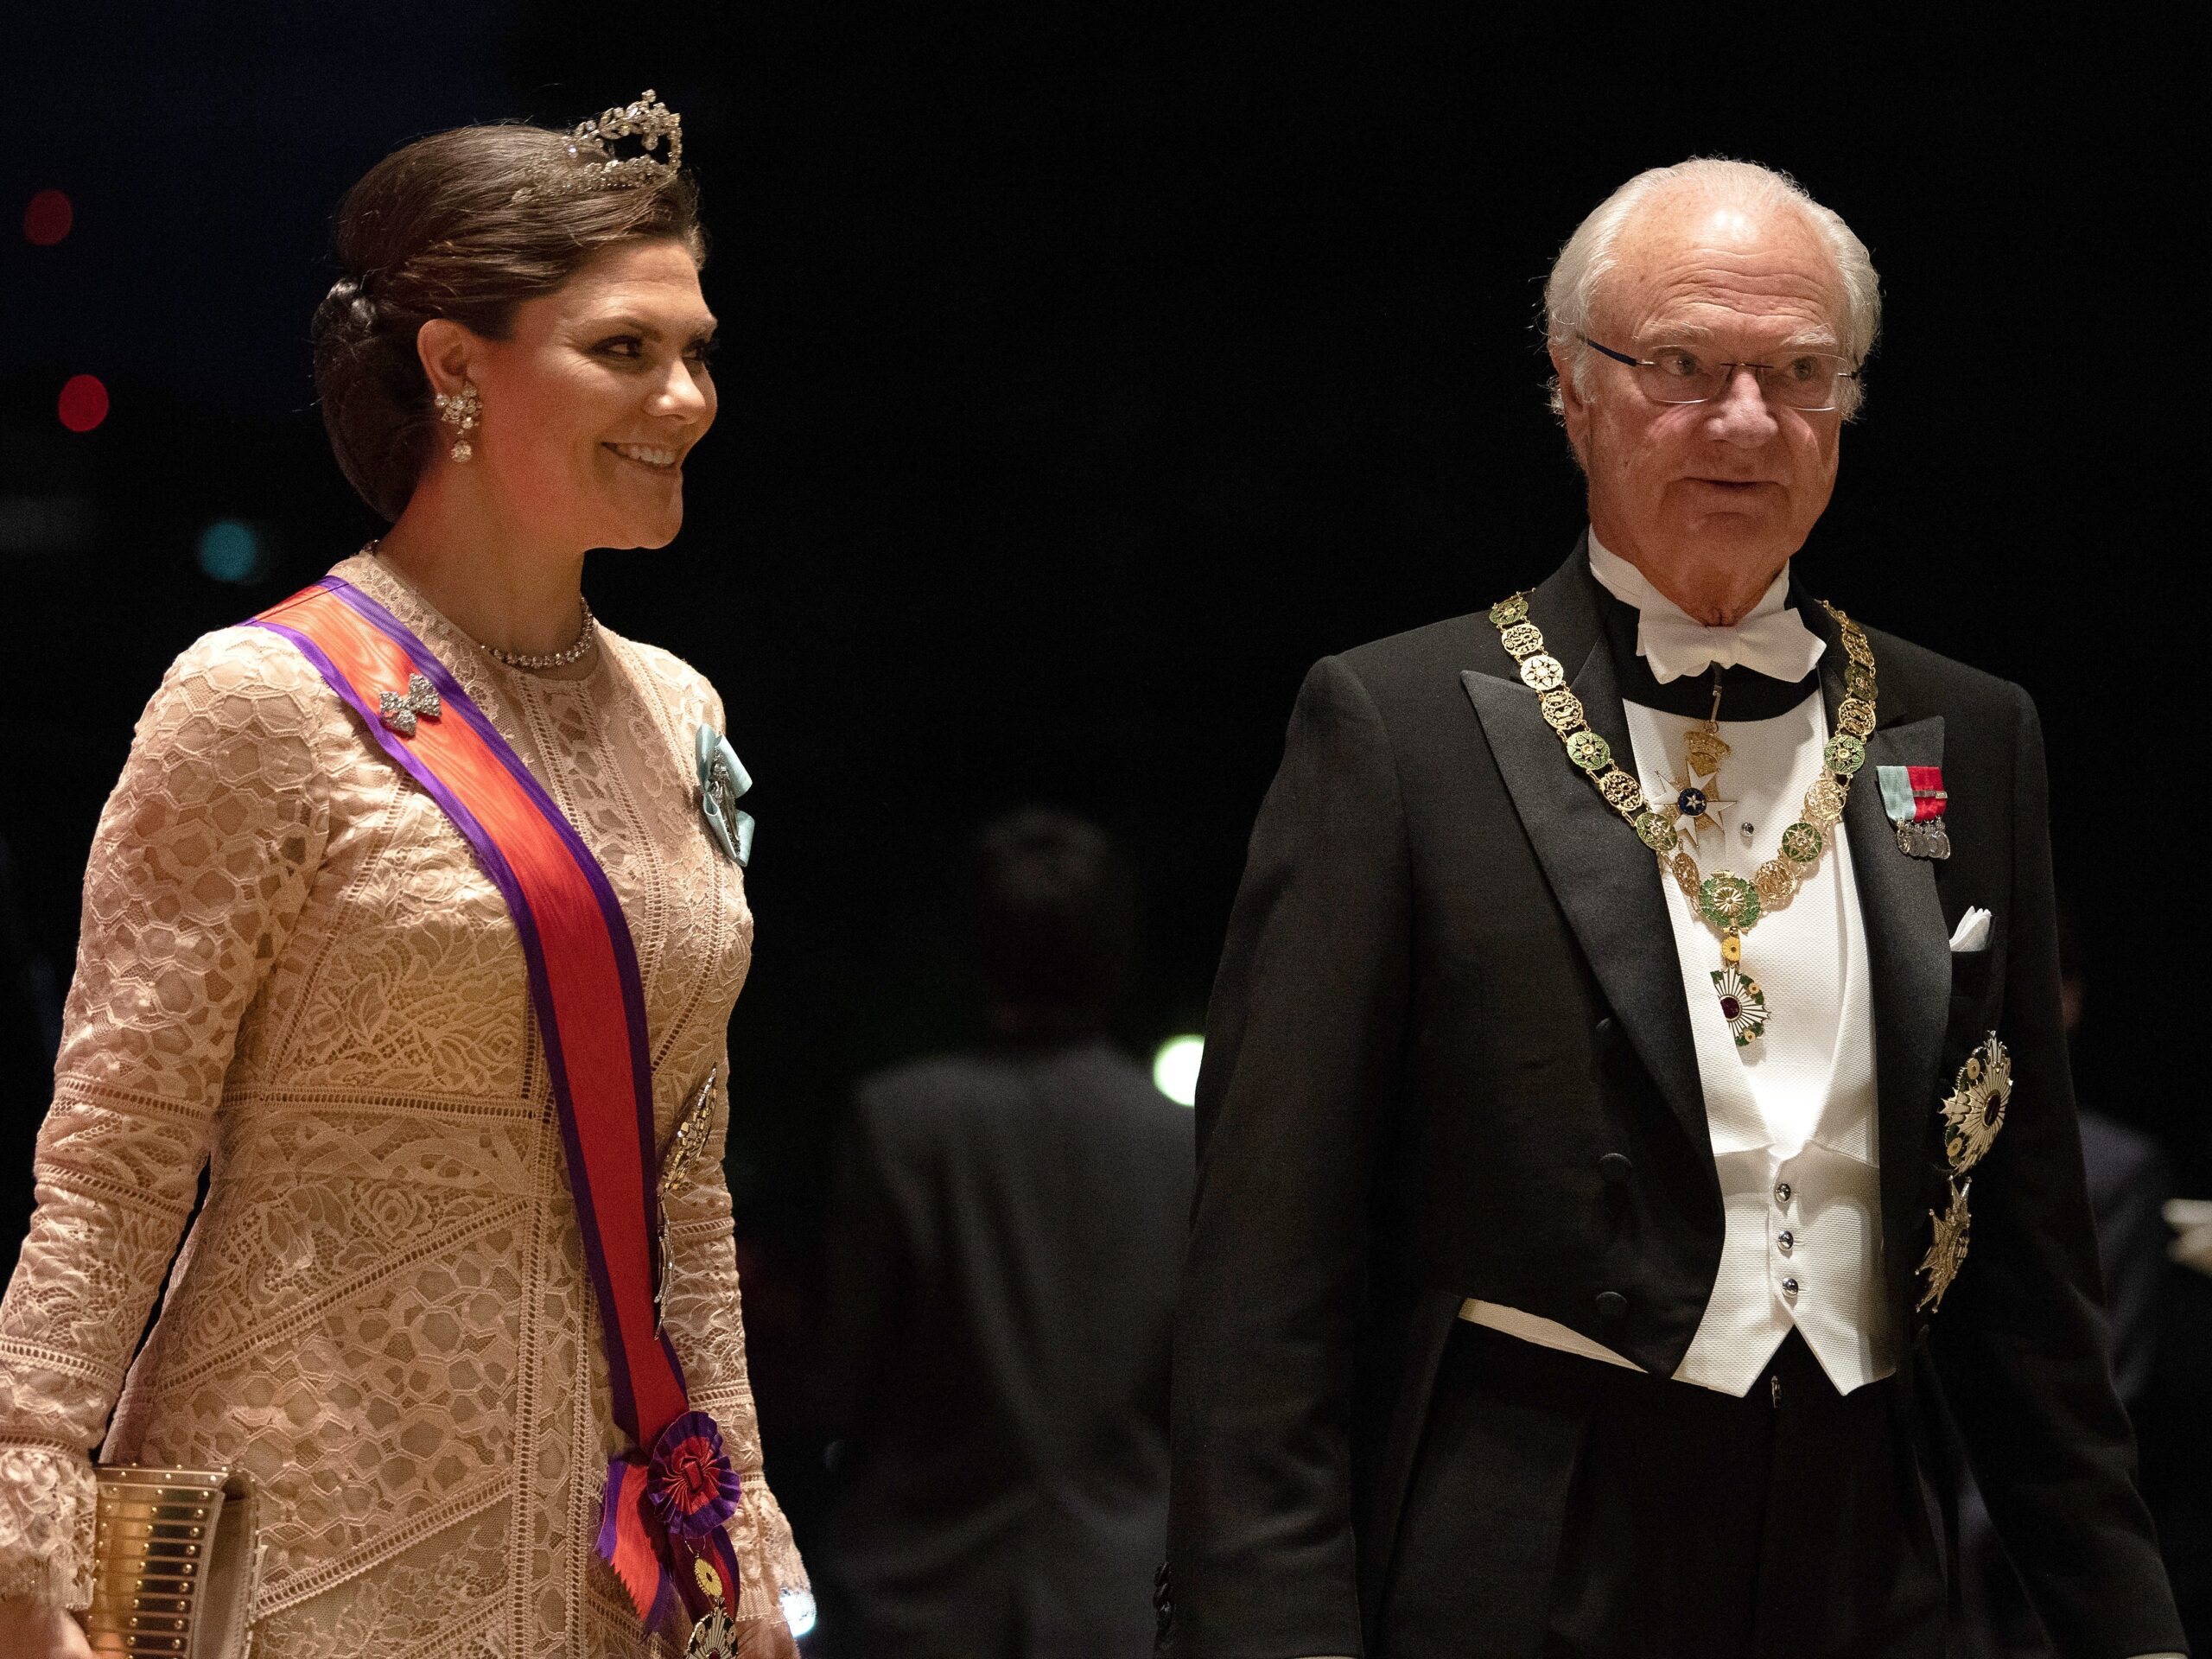 Crown Princess Victoria of Sweden and her father Carl XVI Gustaf of Sweden arrive at the Imperial Palace for the Court Banquets after the Ceremony of the Enthronement of Emperor Naruhito on October 22, 2019 in Tokyo, Japan.